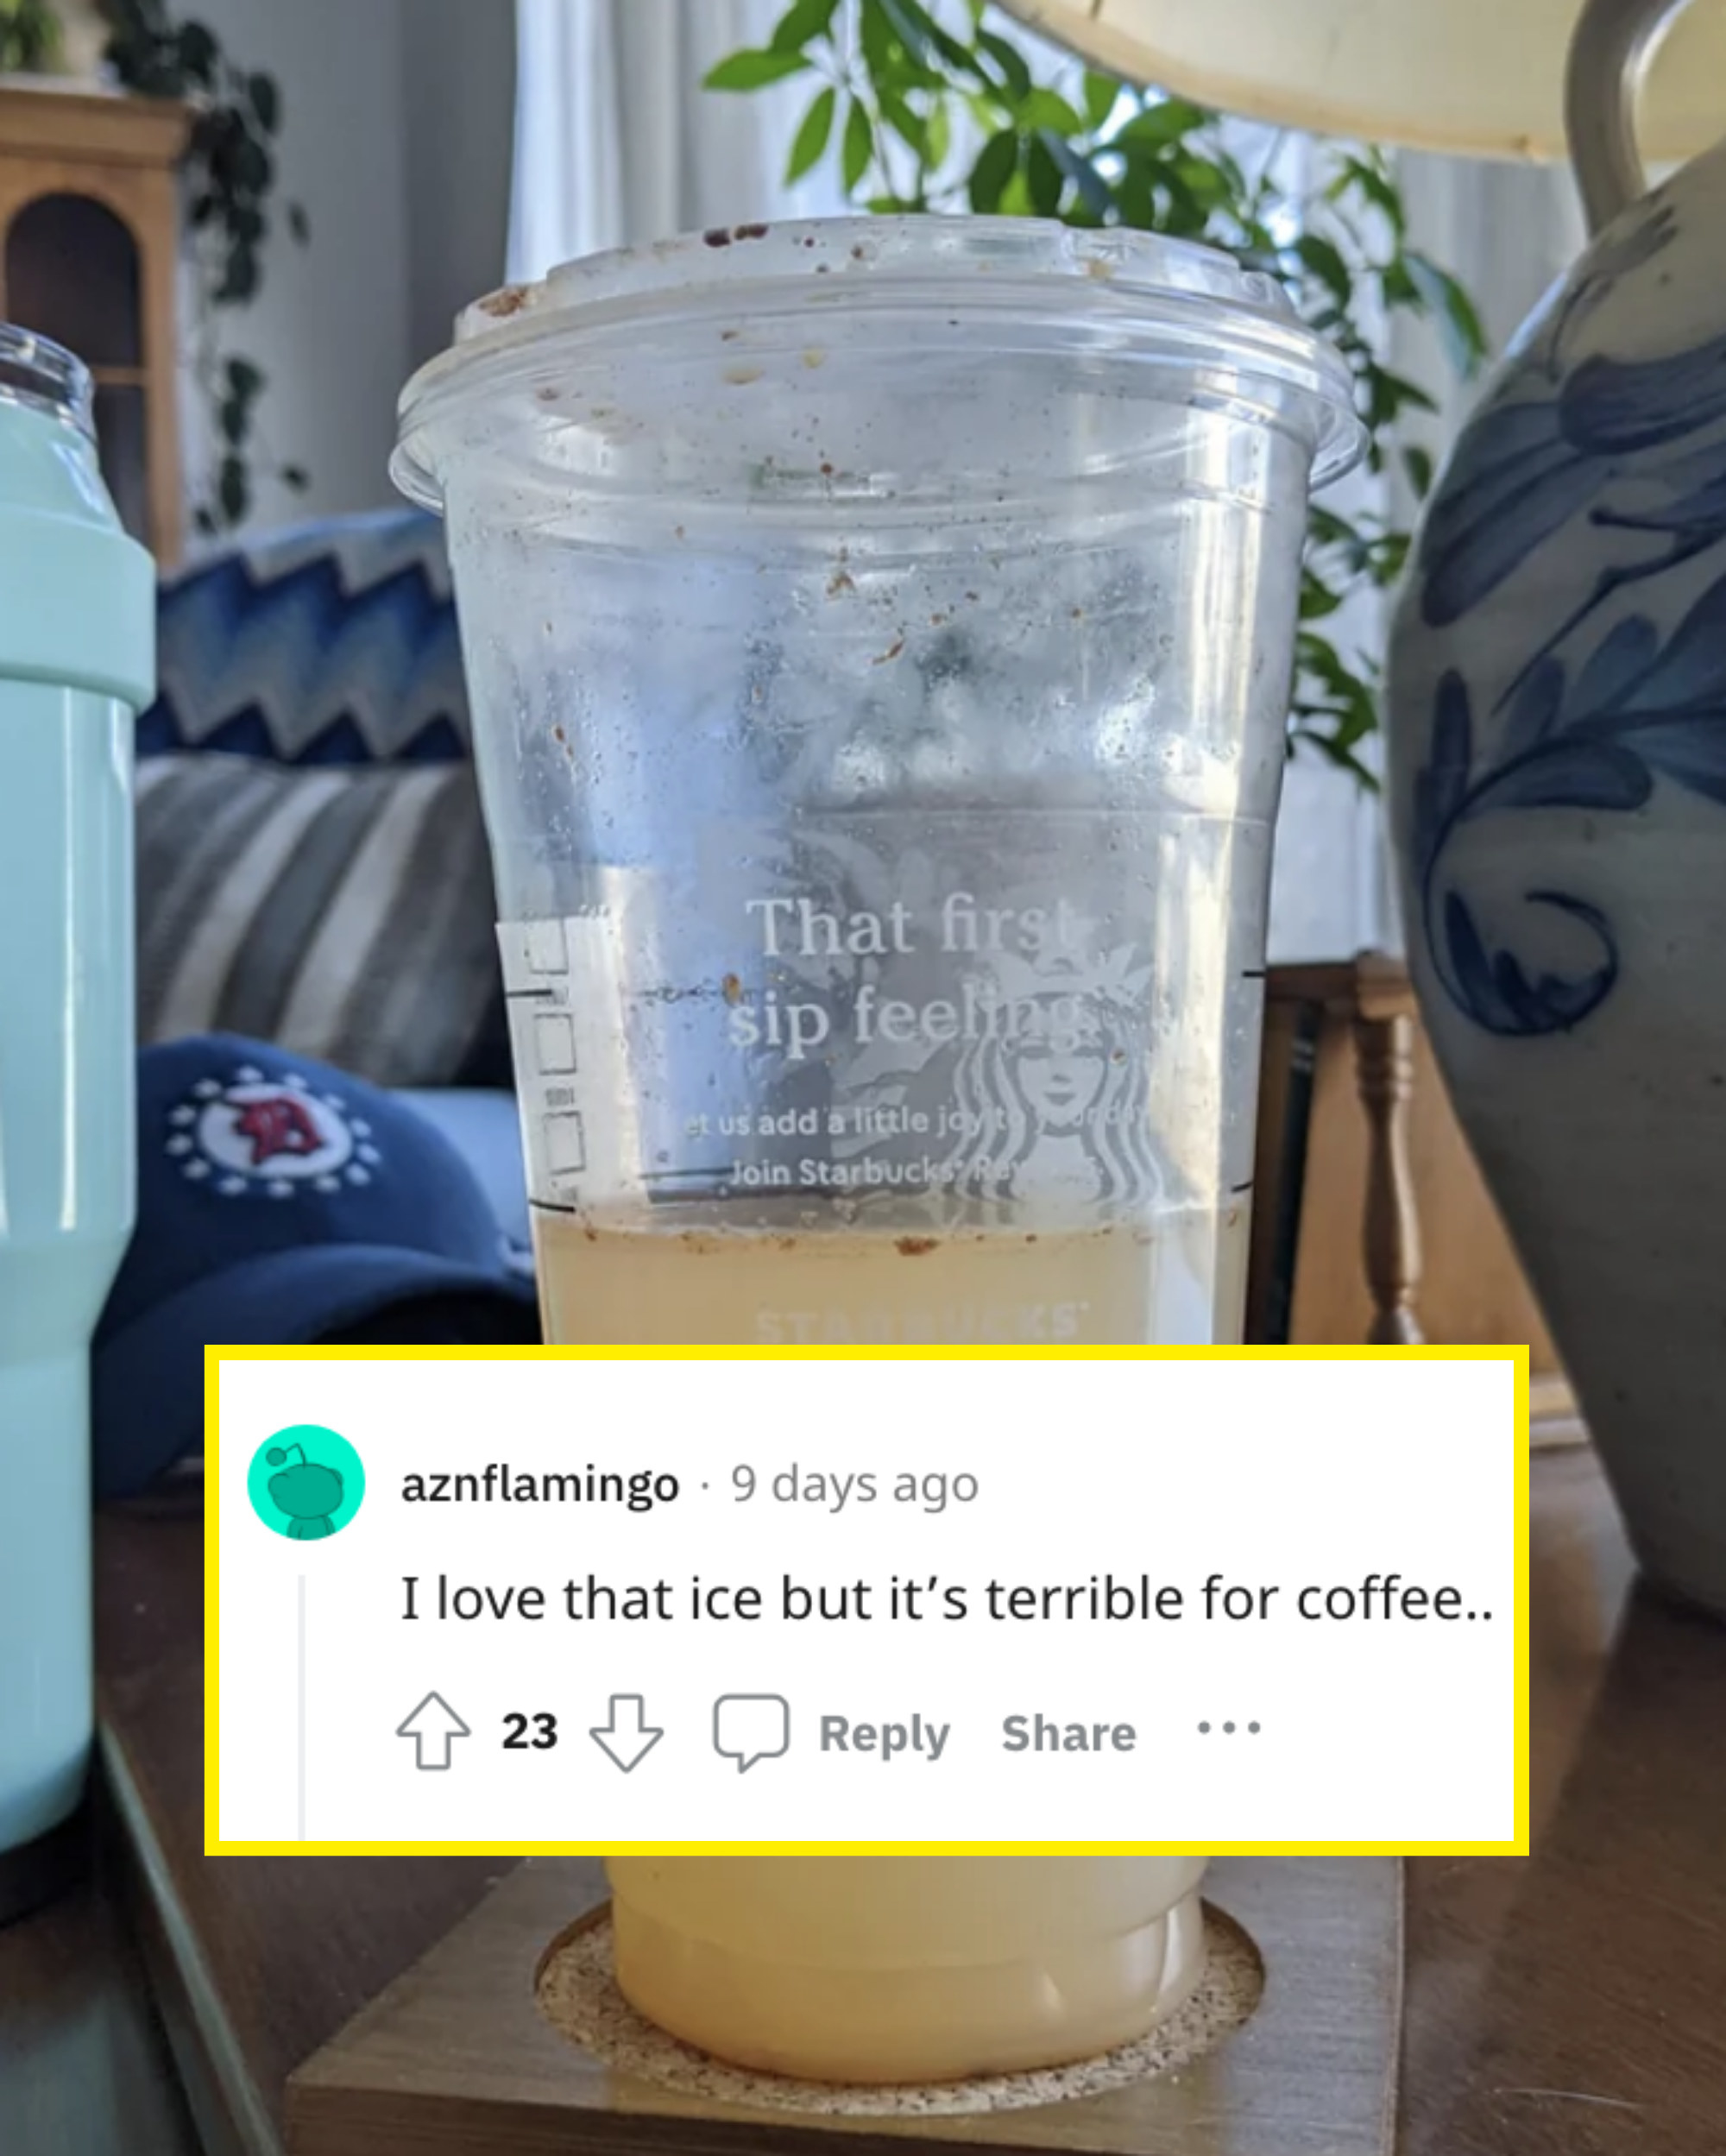 A Venti Starbucks cup containing visibly watered down iced coffee